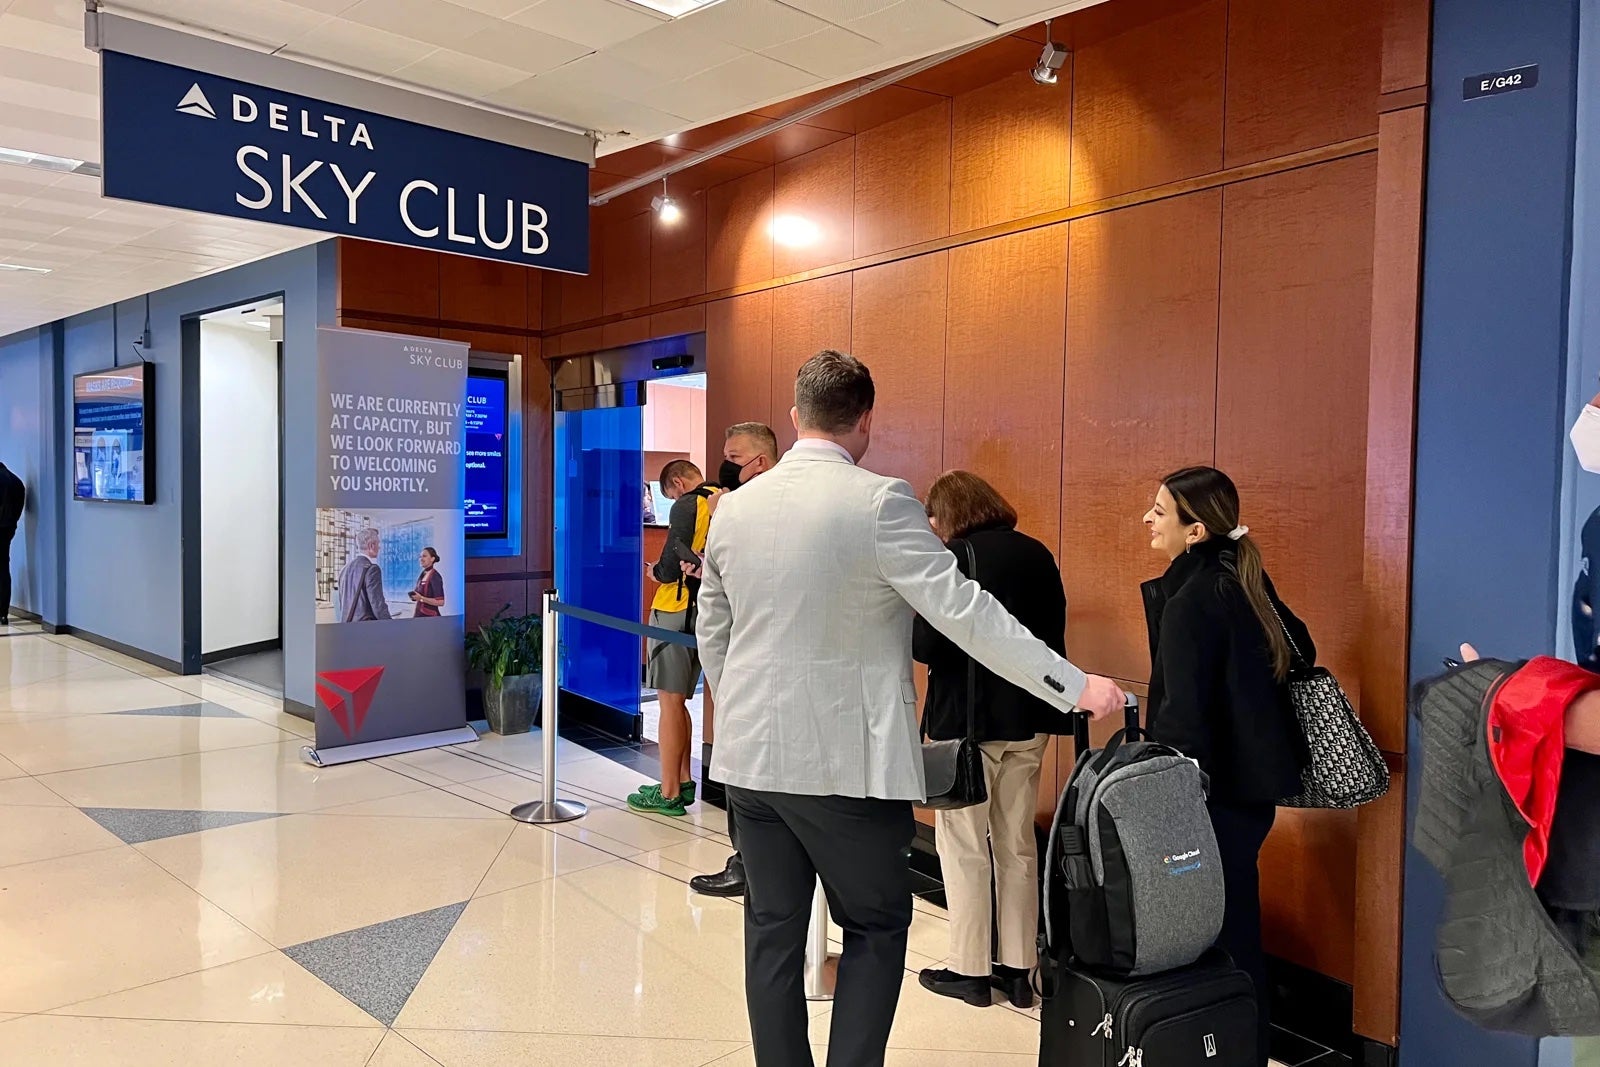 Delta now offers ‘priority boarding’ at Sky Clubs to skip the wait